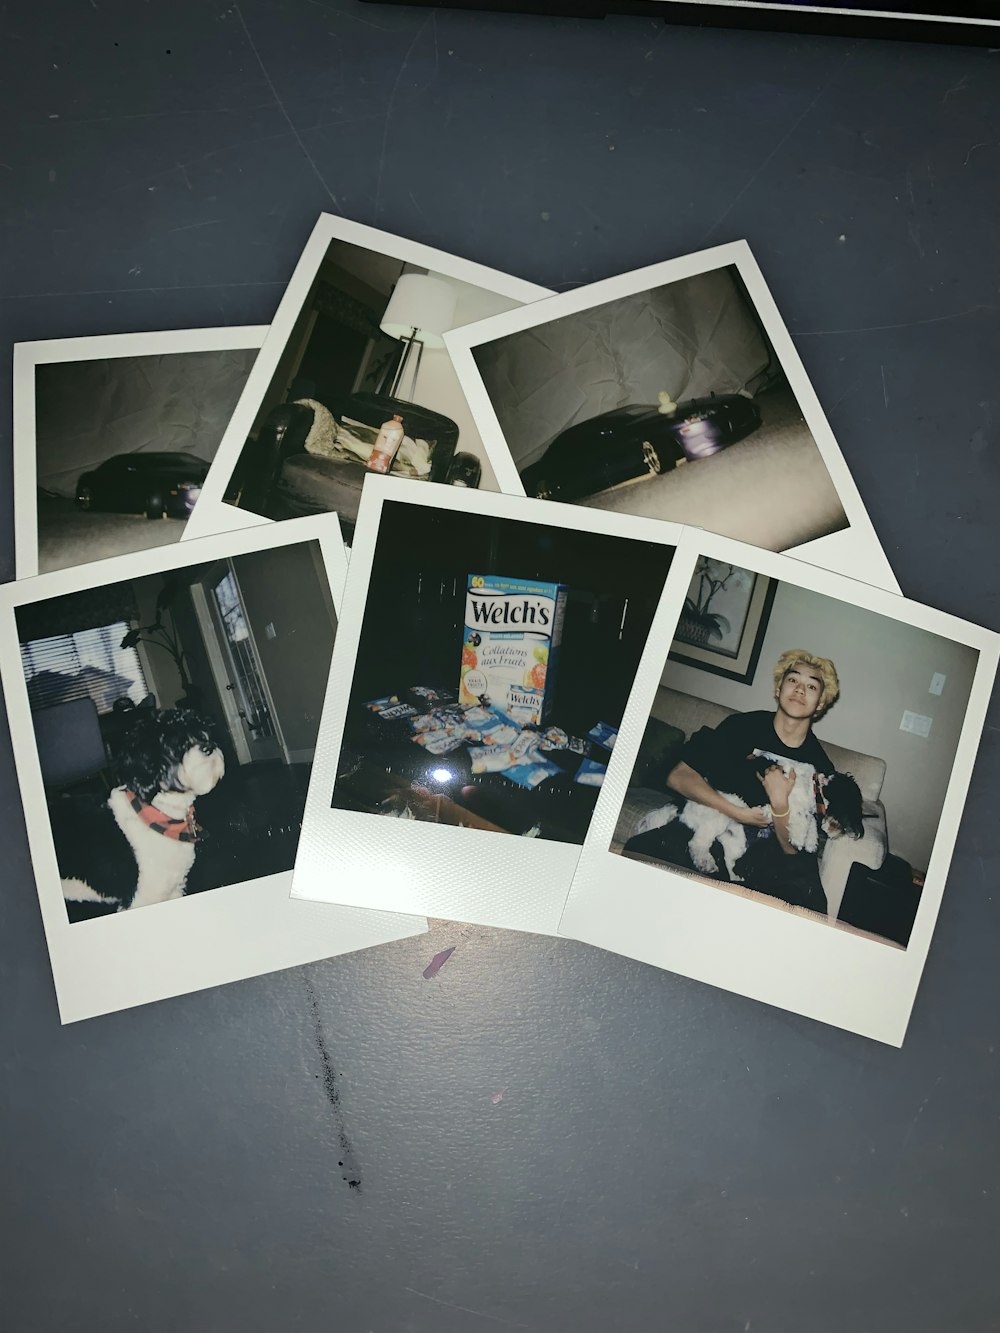 a group of polaroid pictures of a person and a cat